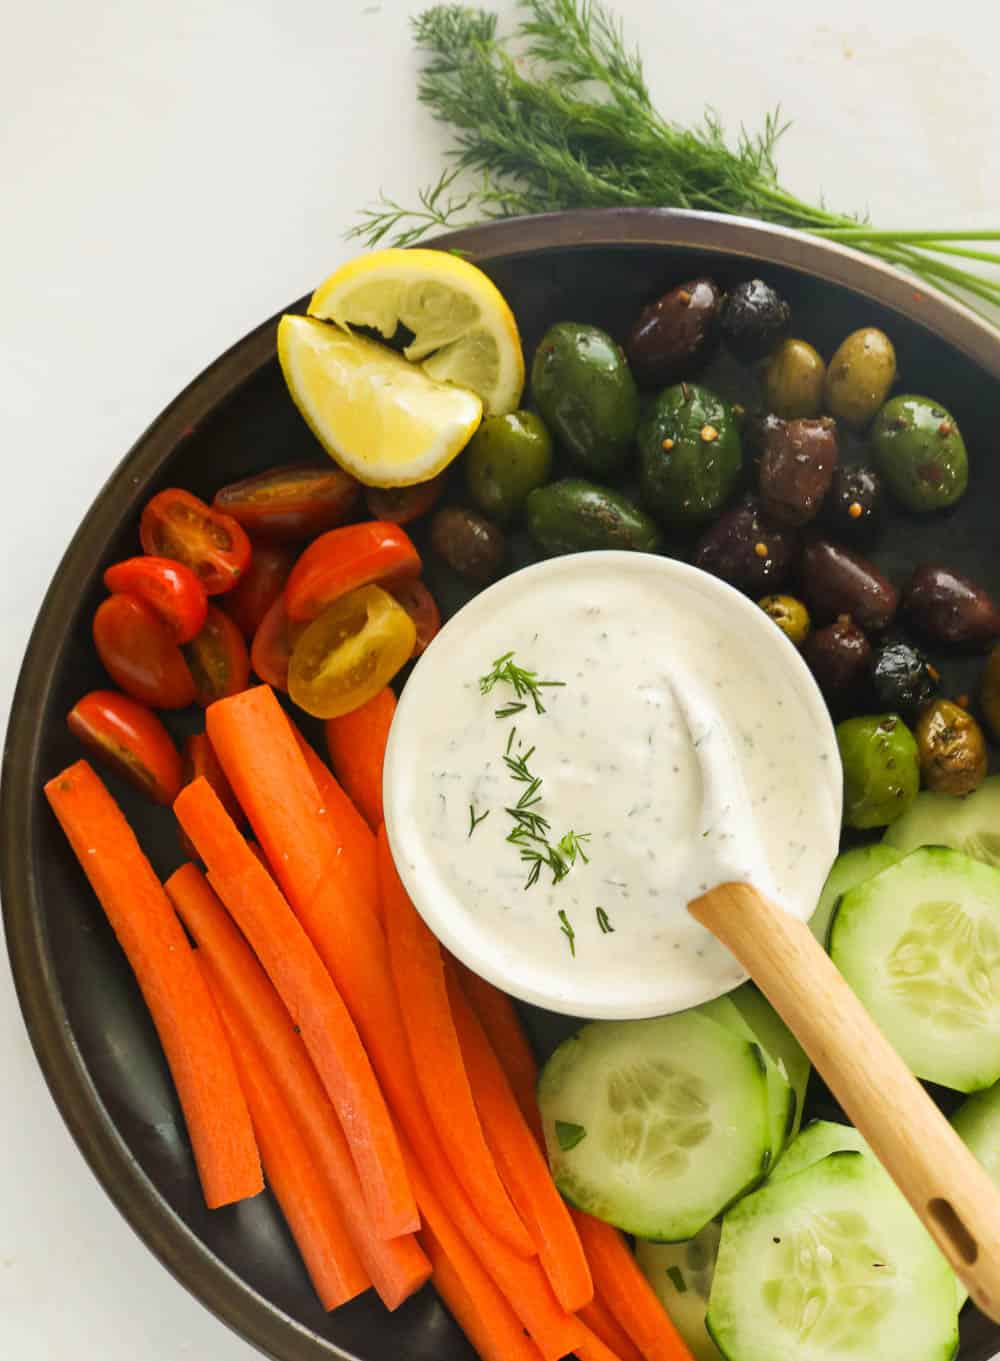 Dill sauce with antipasta